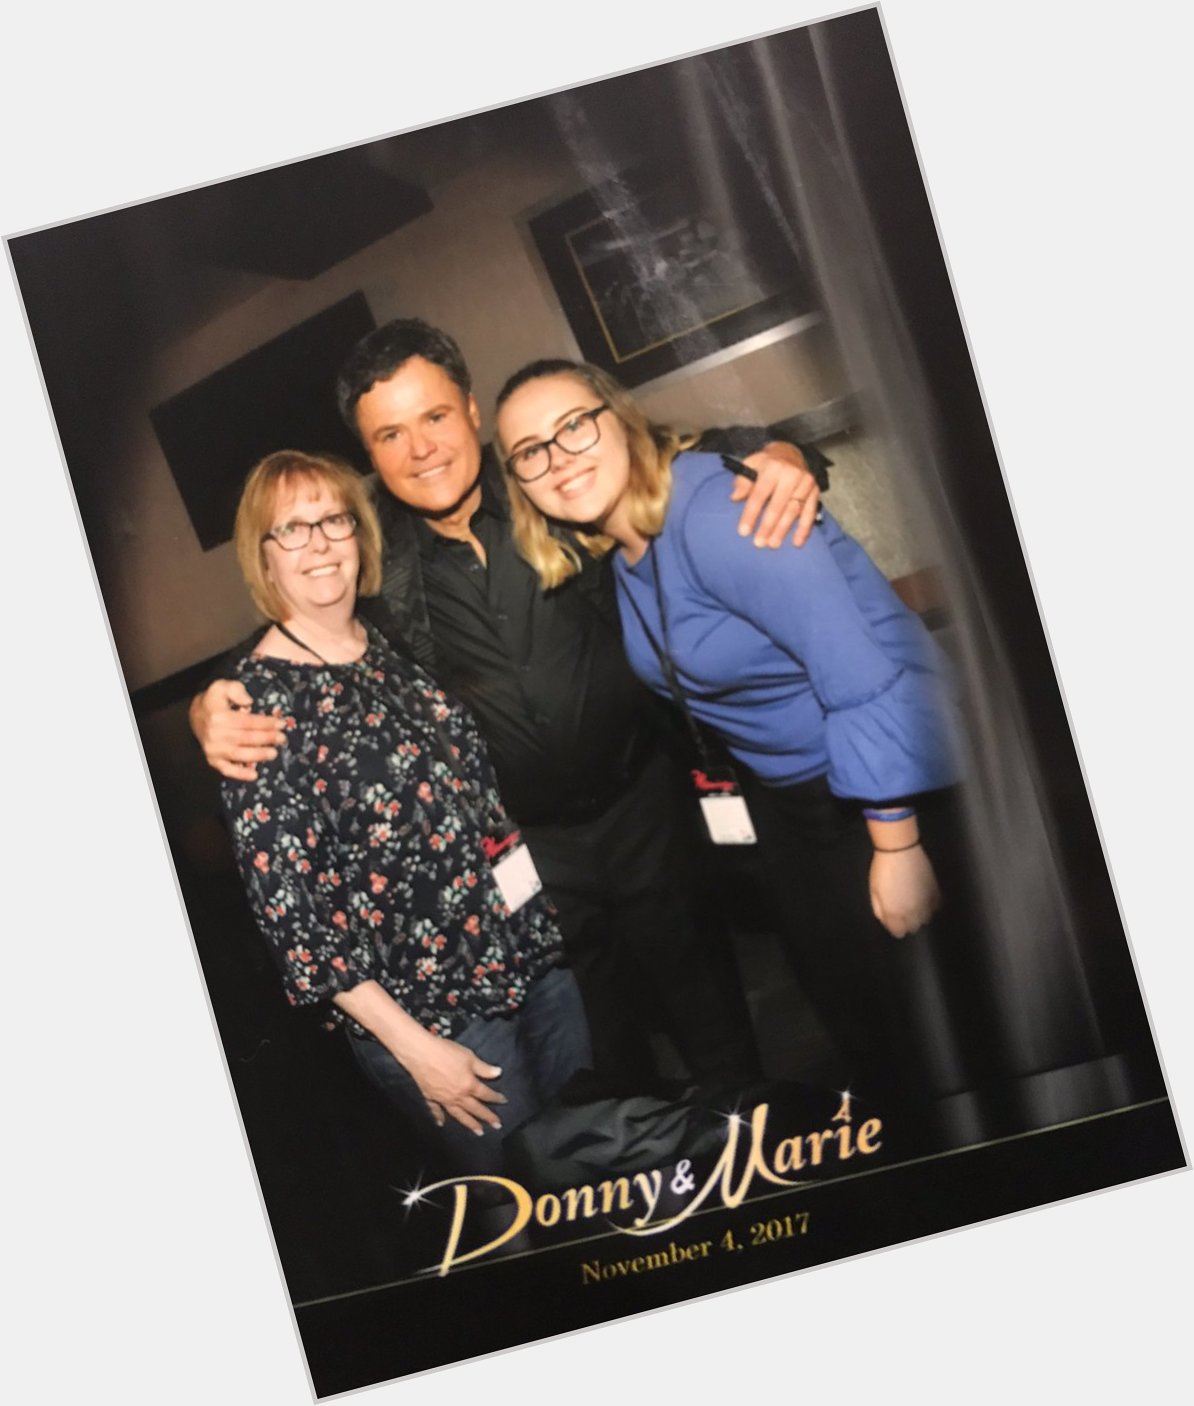 HAPPY BIRTHDAY TO MY HERO, THE MAN I LOOK UP TO, DONNY OSMOND!! Hope you have a fantastic day!!!!!      